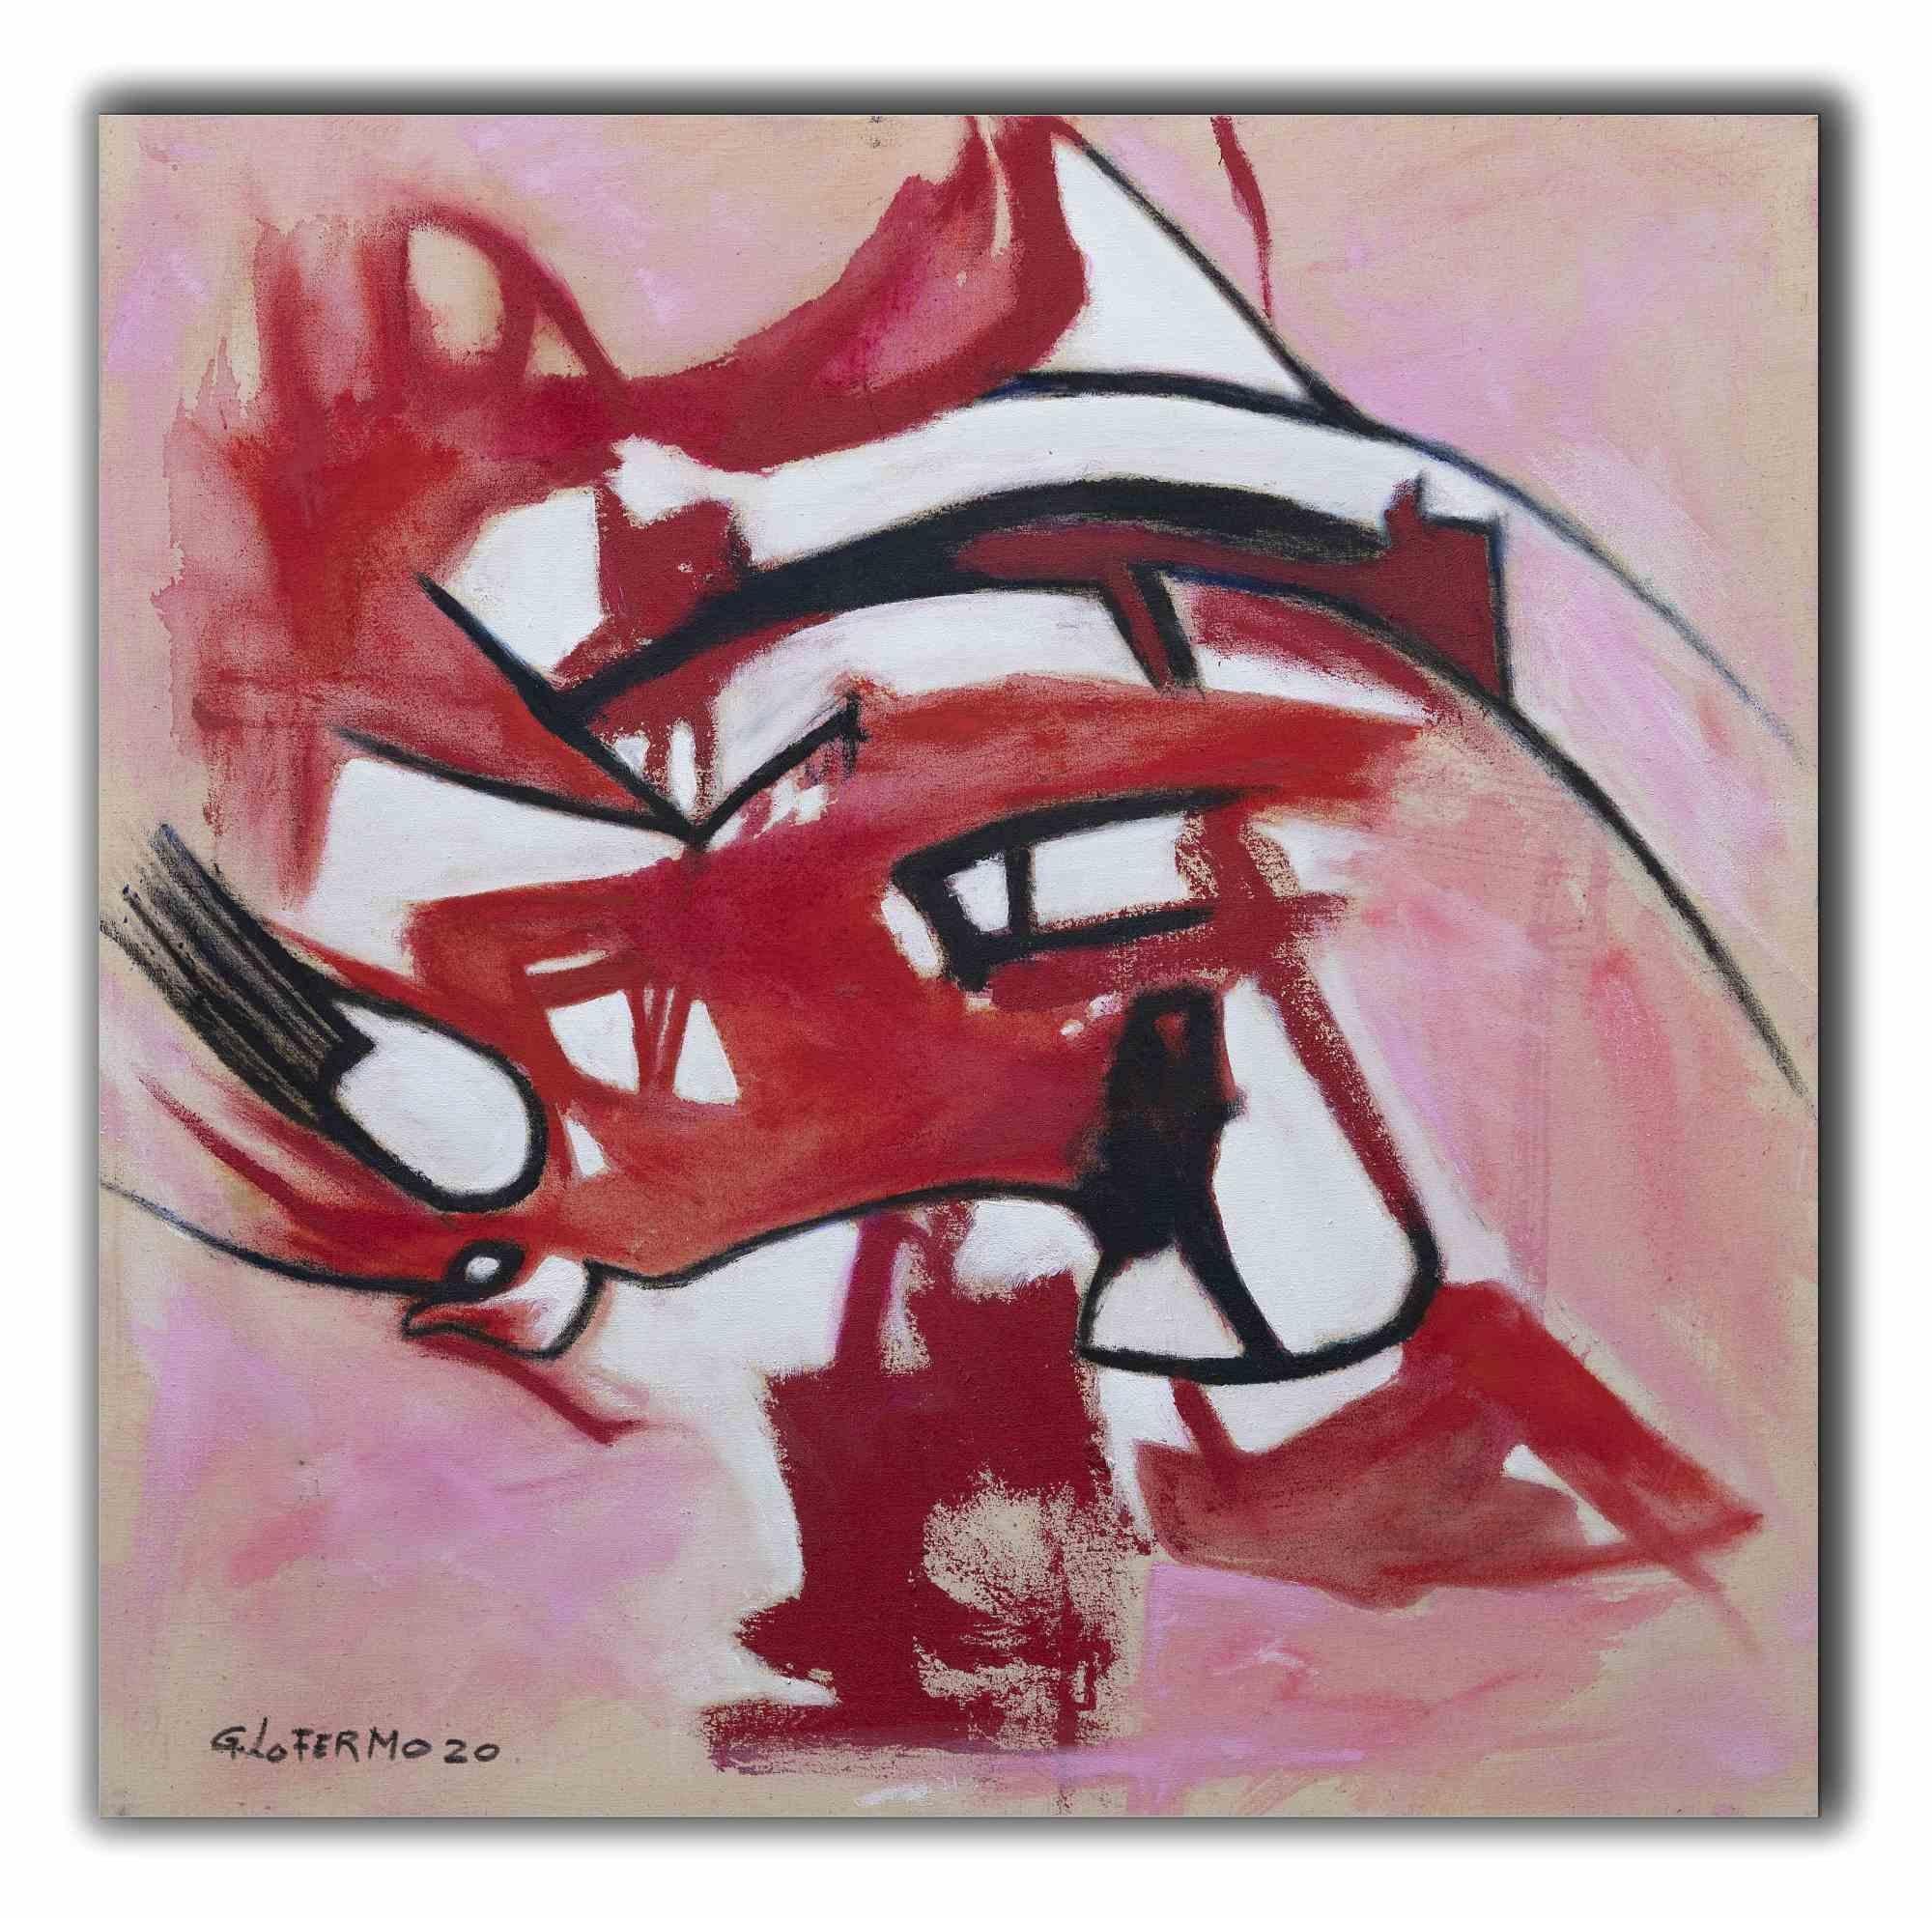 Pink and Red Composition is an original artwork realized by Giorgio Lo Fermo (b. 1947) in 2020.

Original Oil Painting on Canvas.

Hand-signed, titled and dated on the back of the canvas.

Hand-signed and dated on the lower left corner: G. Lo Fermo